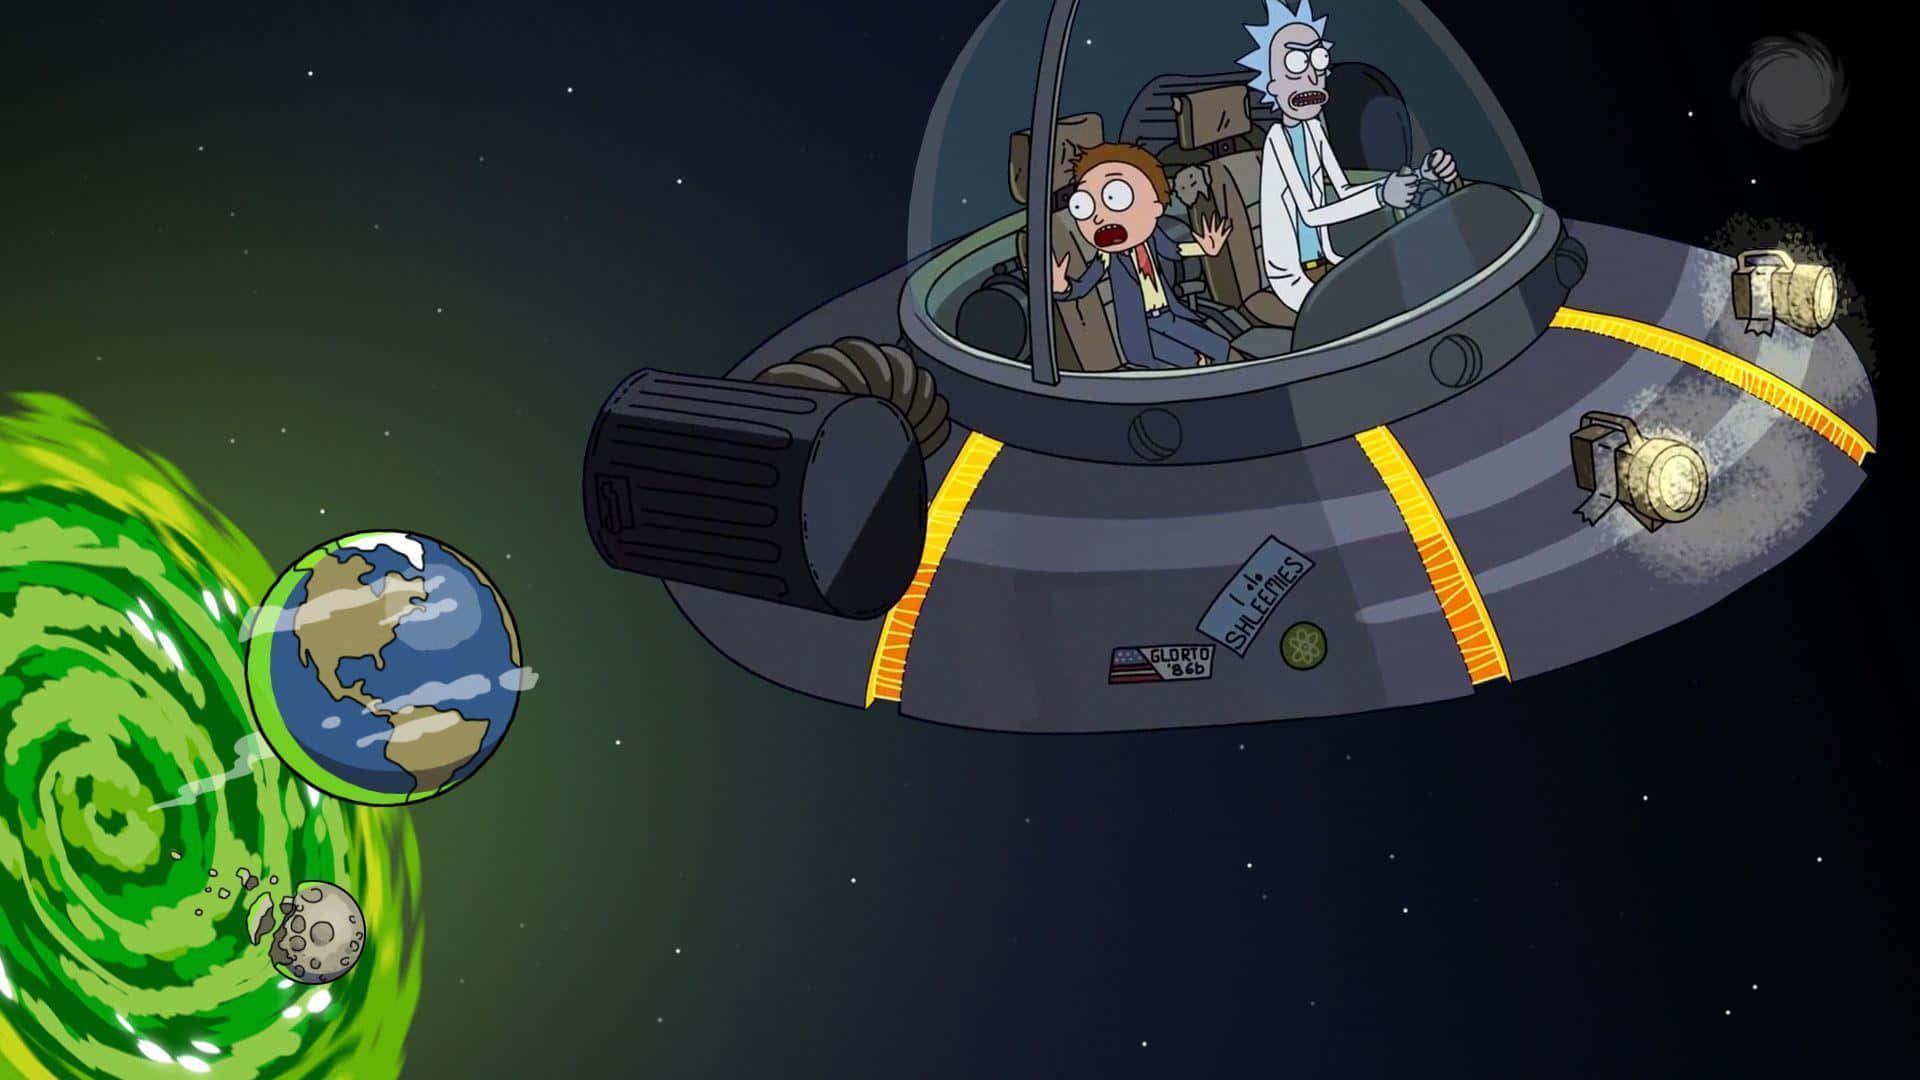 "Go Stargazing With Rick And Morty!" Wallpaper